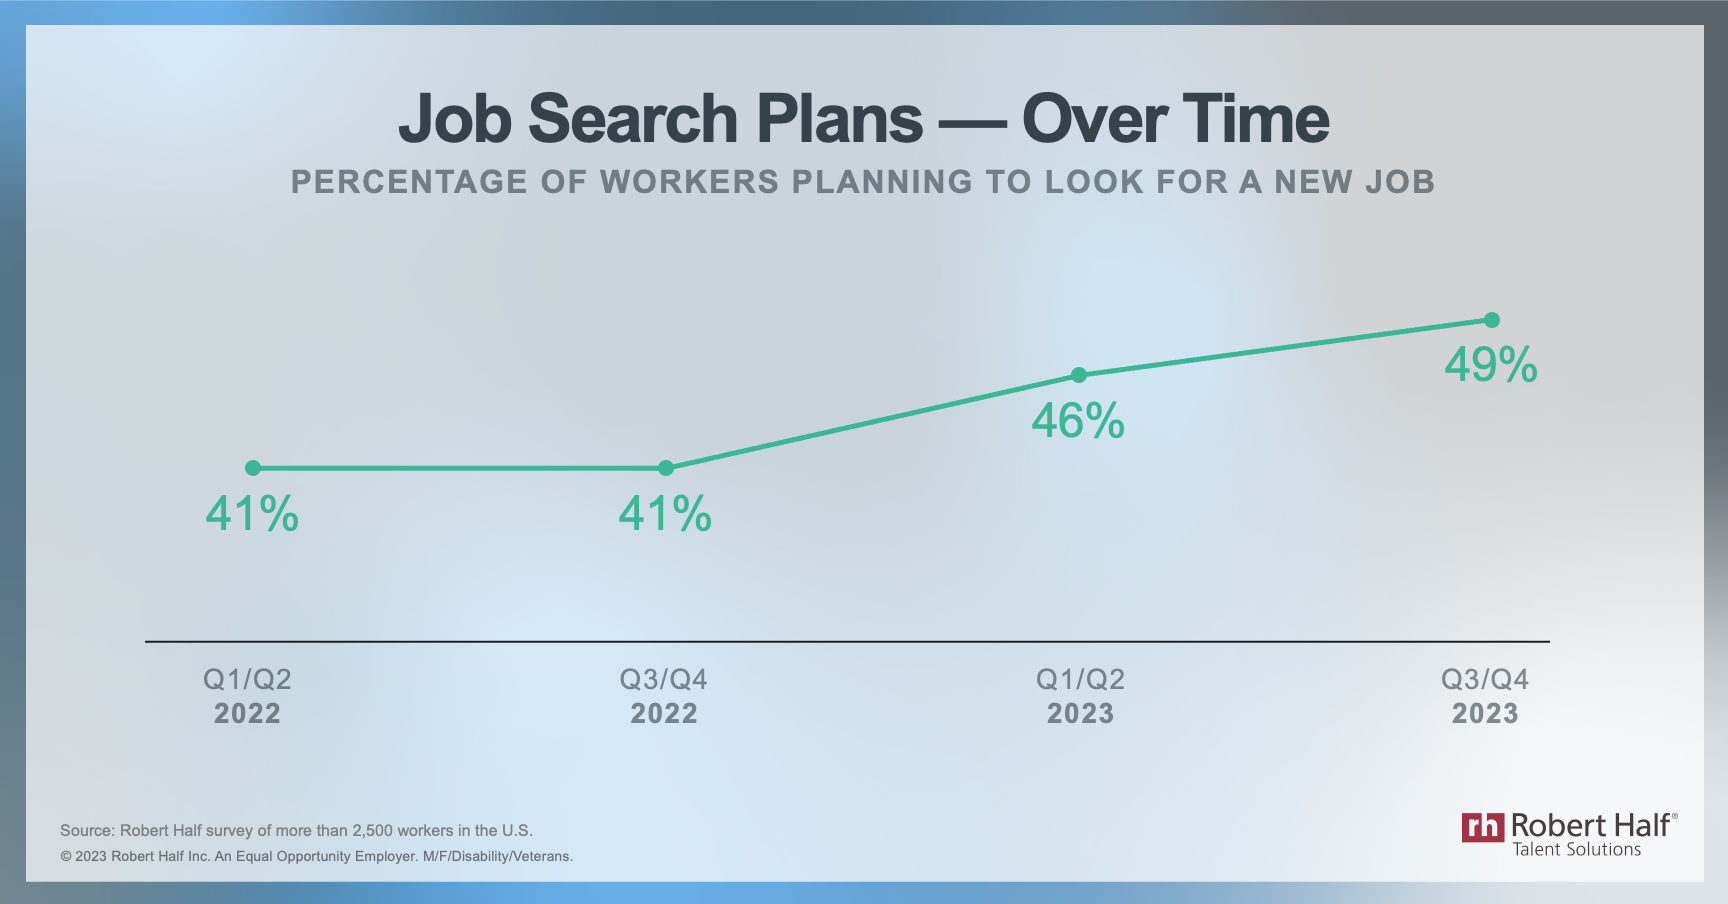 Job Search Plans Over Time Infographic